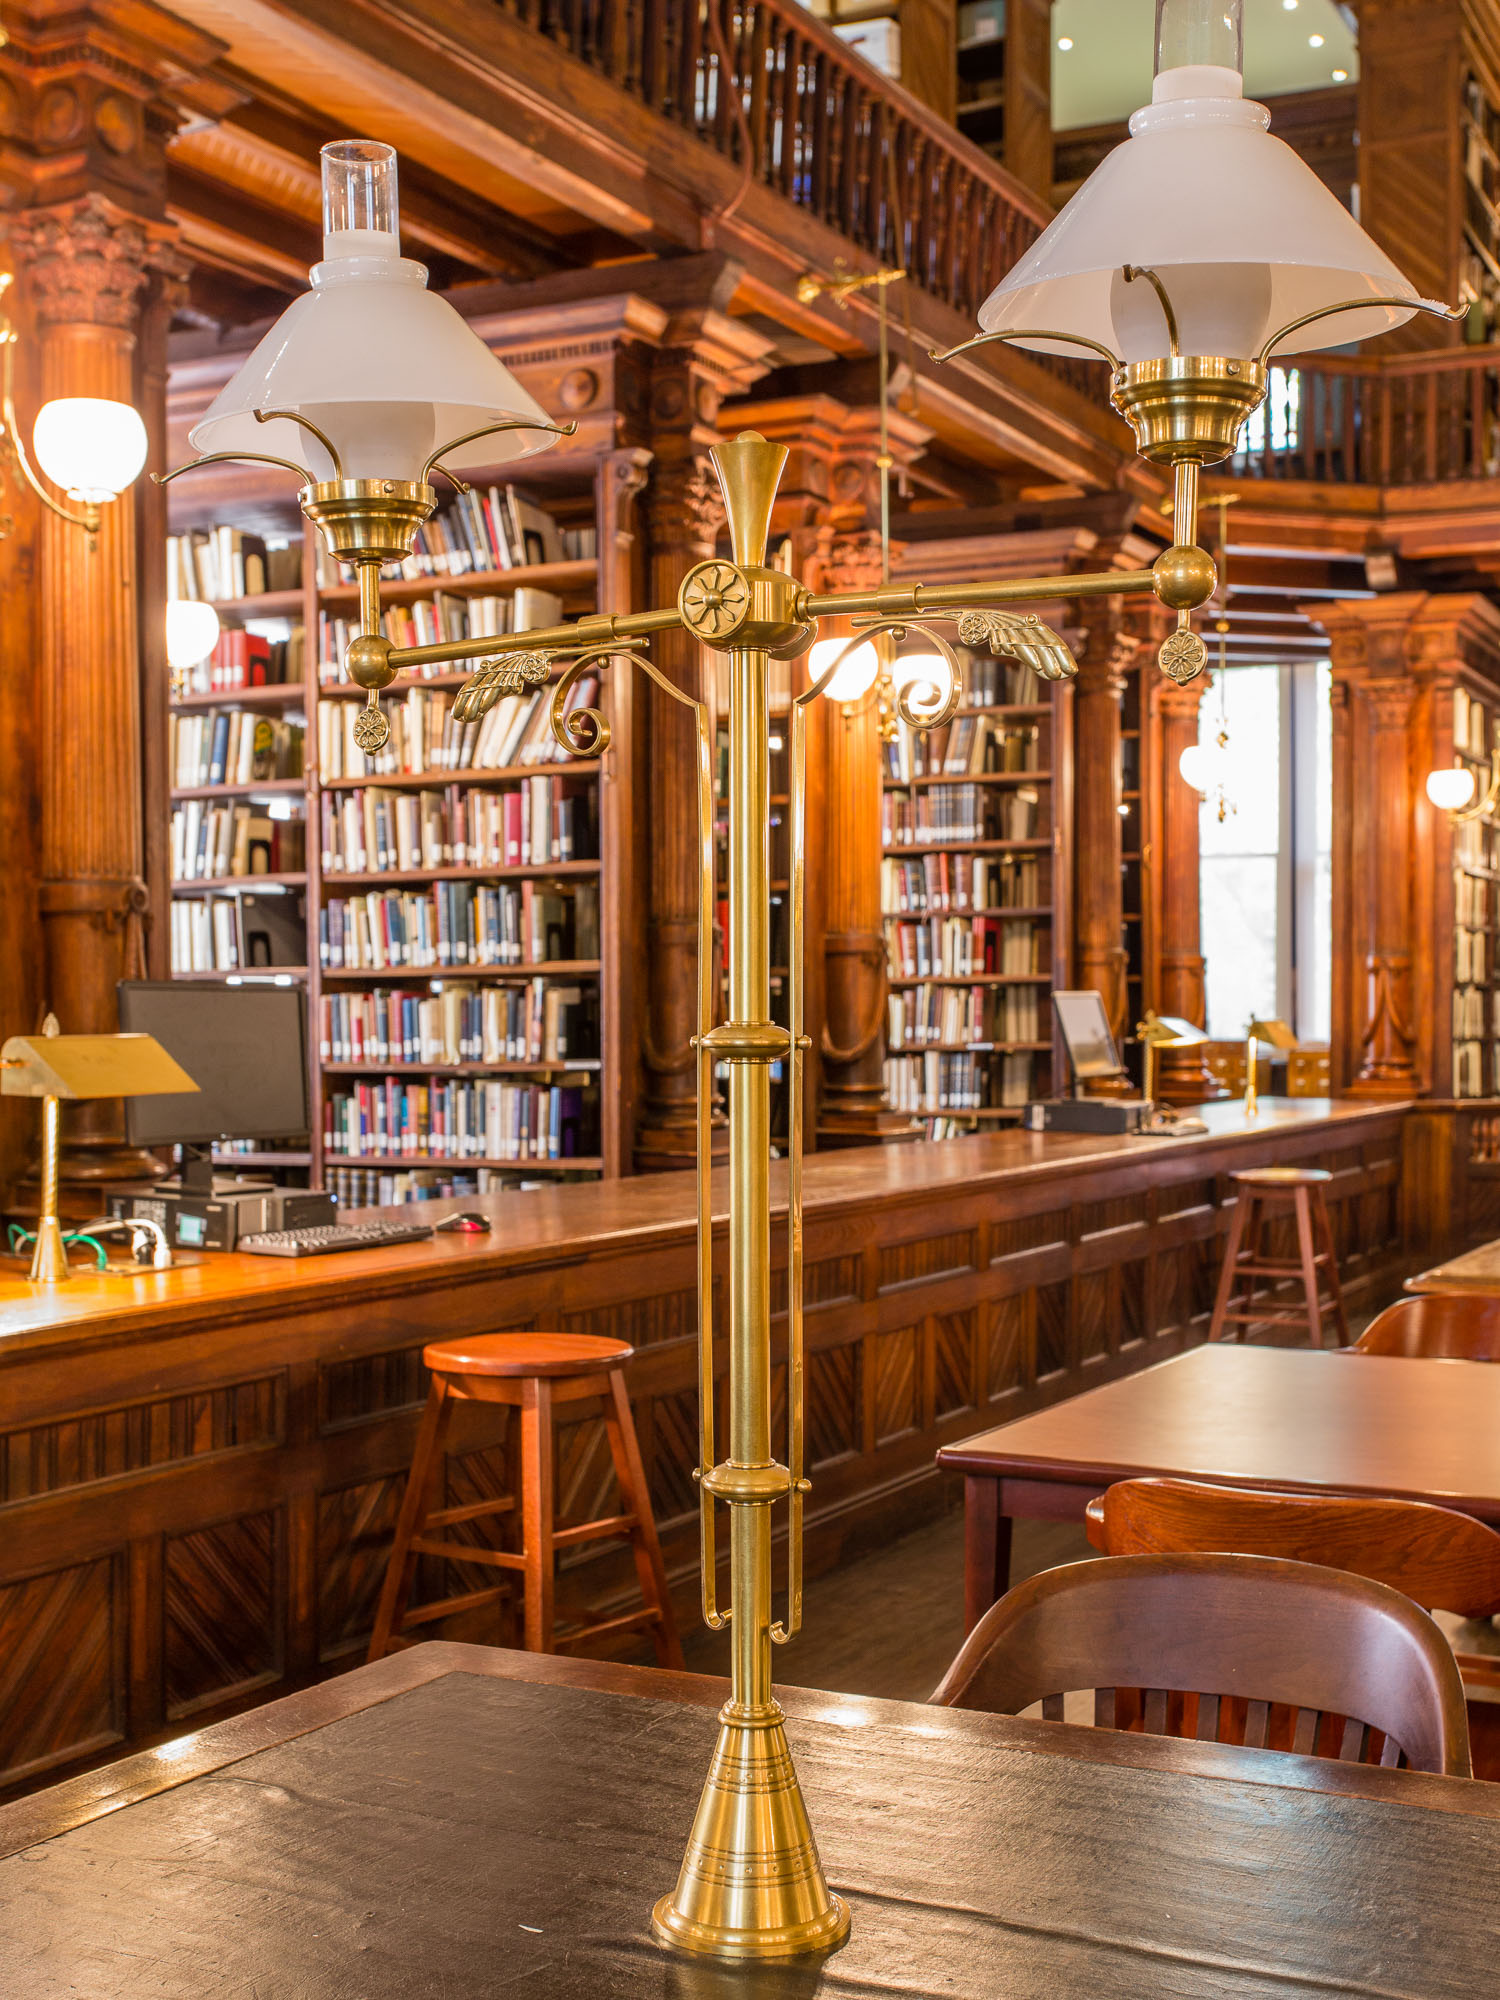 The reading room of the Brooklyn Historical Society with ornate brass lamps and carved woodwork.